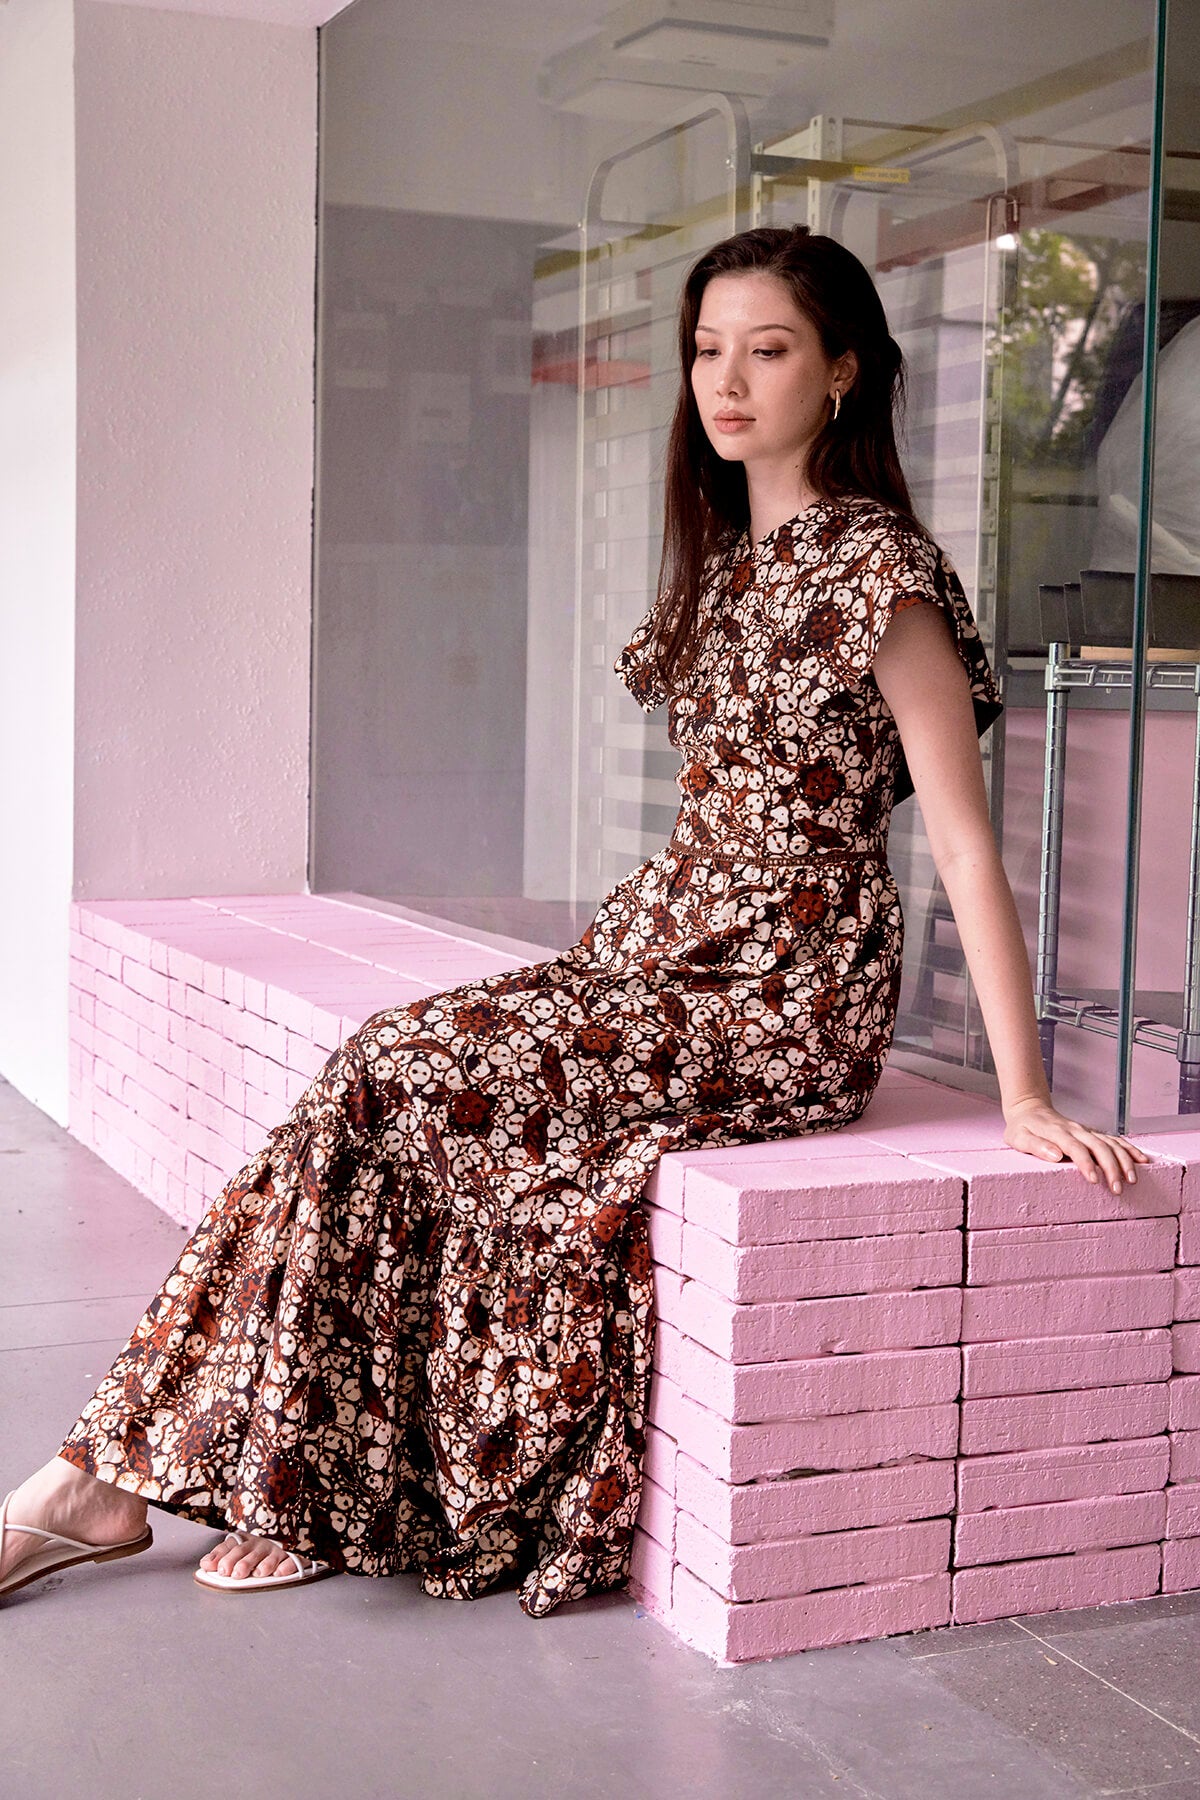 Eurasian lady sitting on a pink ledge at Everton Park Singapore. She wears a maxi batik dress by Singapore designer brand Dayglow. She is also wearing a pair of gold earrings and white strappy sandals, and has her gaze on the floor.